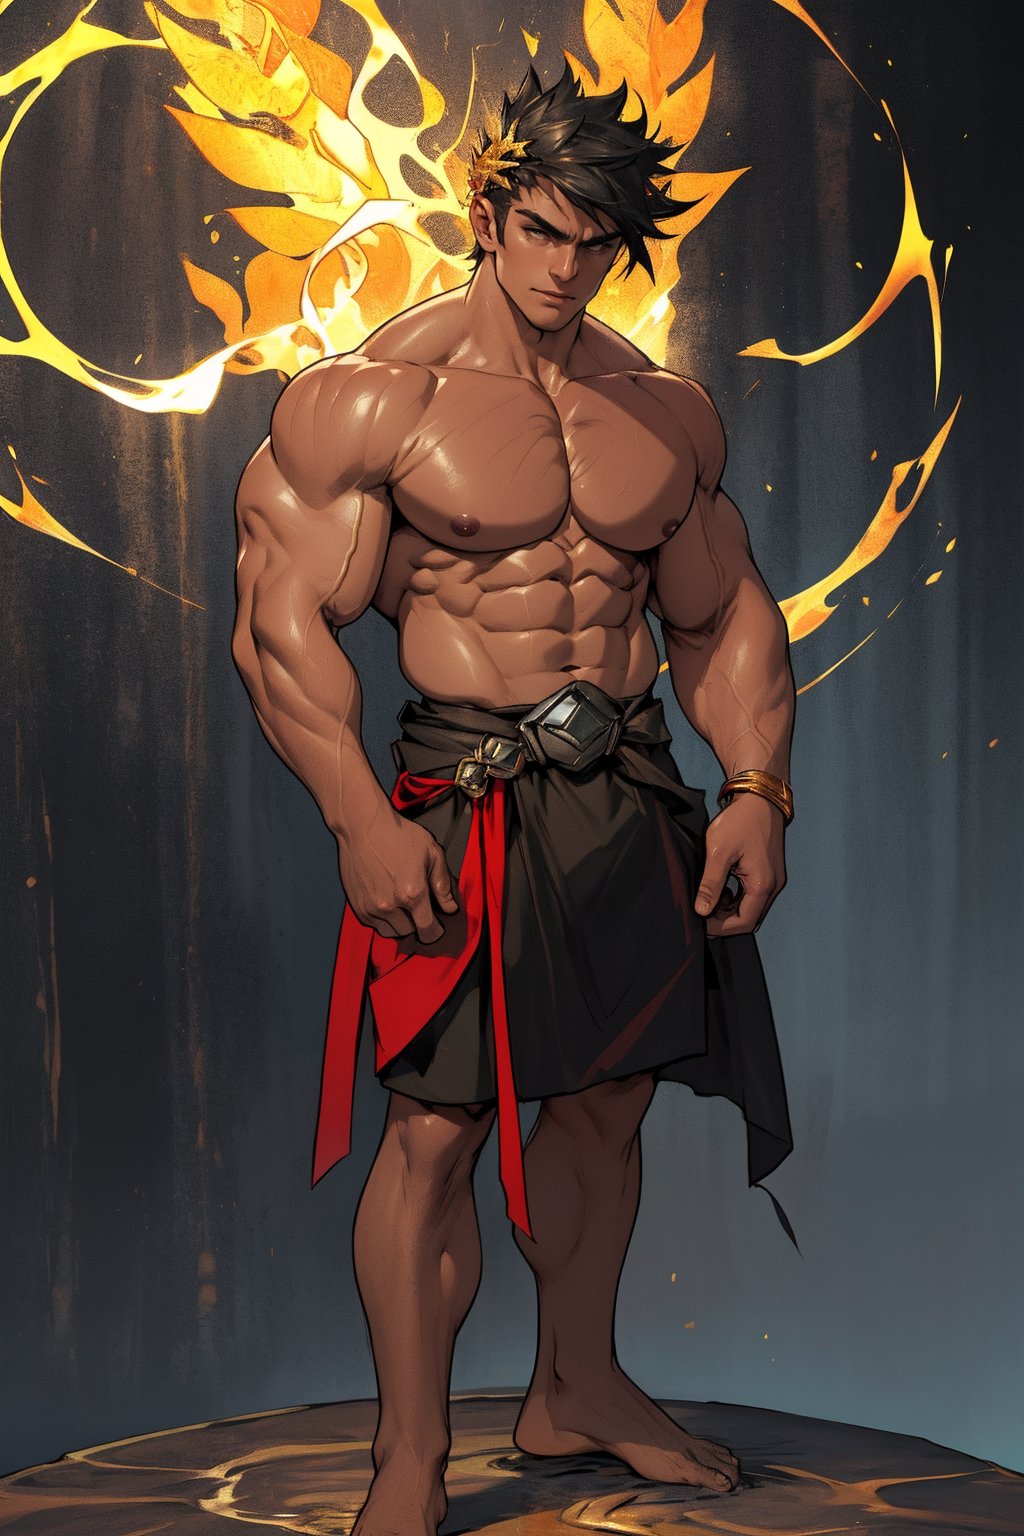 Zagreus' chiseled physique fills the frame, defined muscles rippling beneath his bronzed skin as he stands confidently with feet shoulder-width apart. Warm lighting accentuates the contours of his chest and arms, casting a golden glow on his rugged features. The background fades to soft focus, drawing attention solely to the powerful demon's imposing presence.